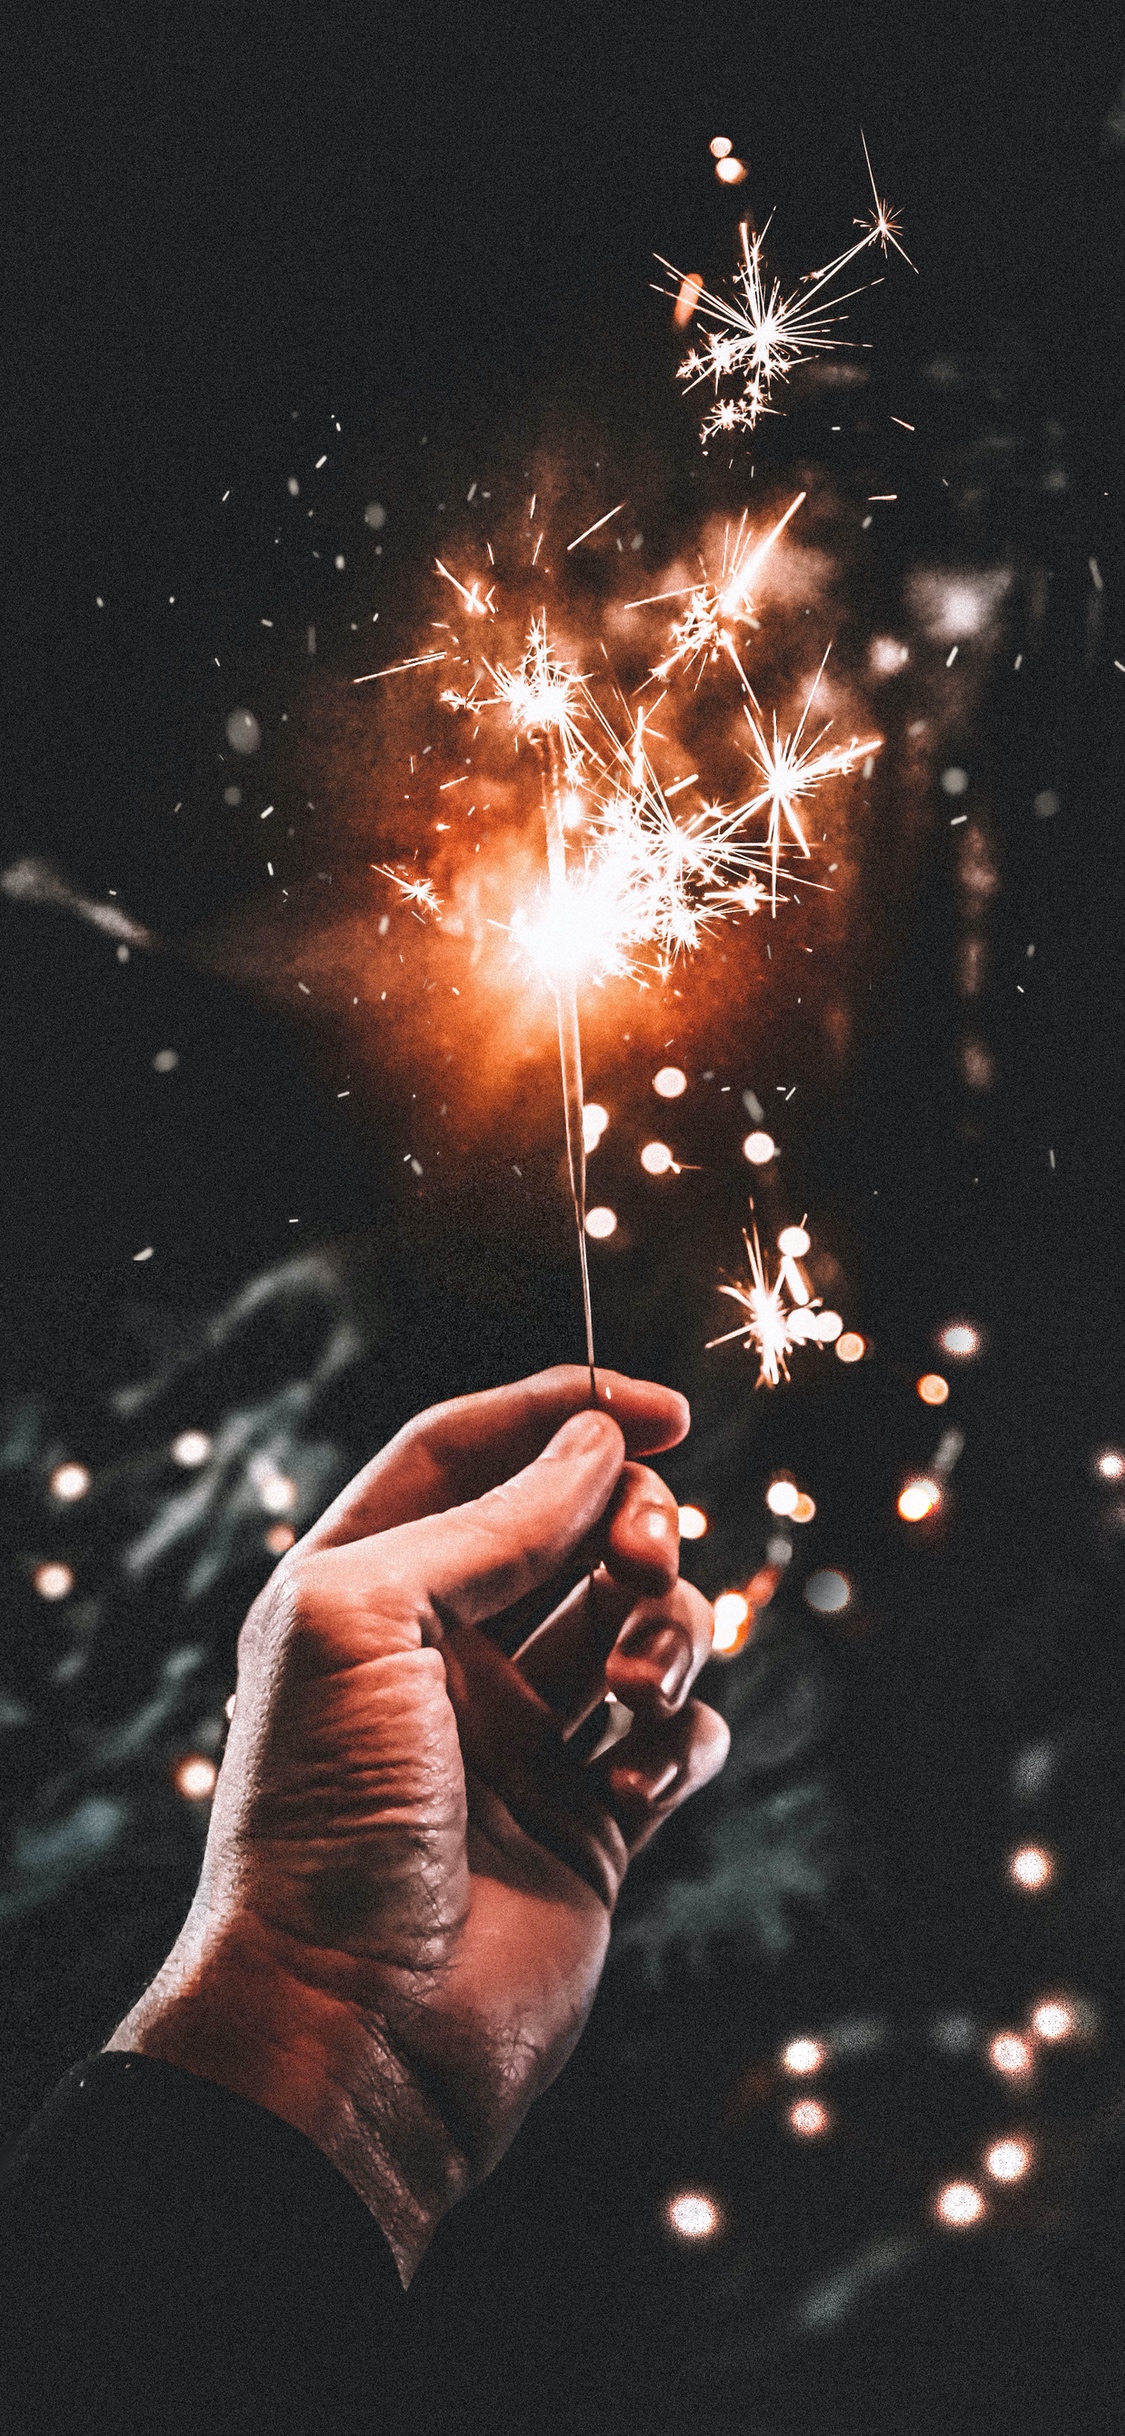 A hand holding a sparkler in the dark. - New Year